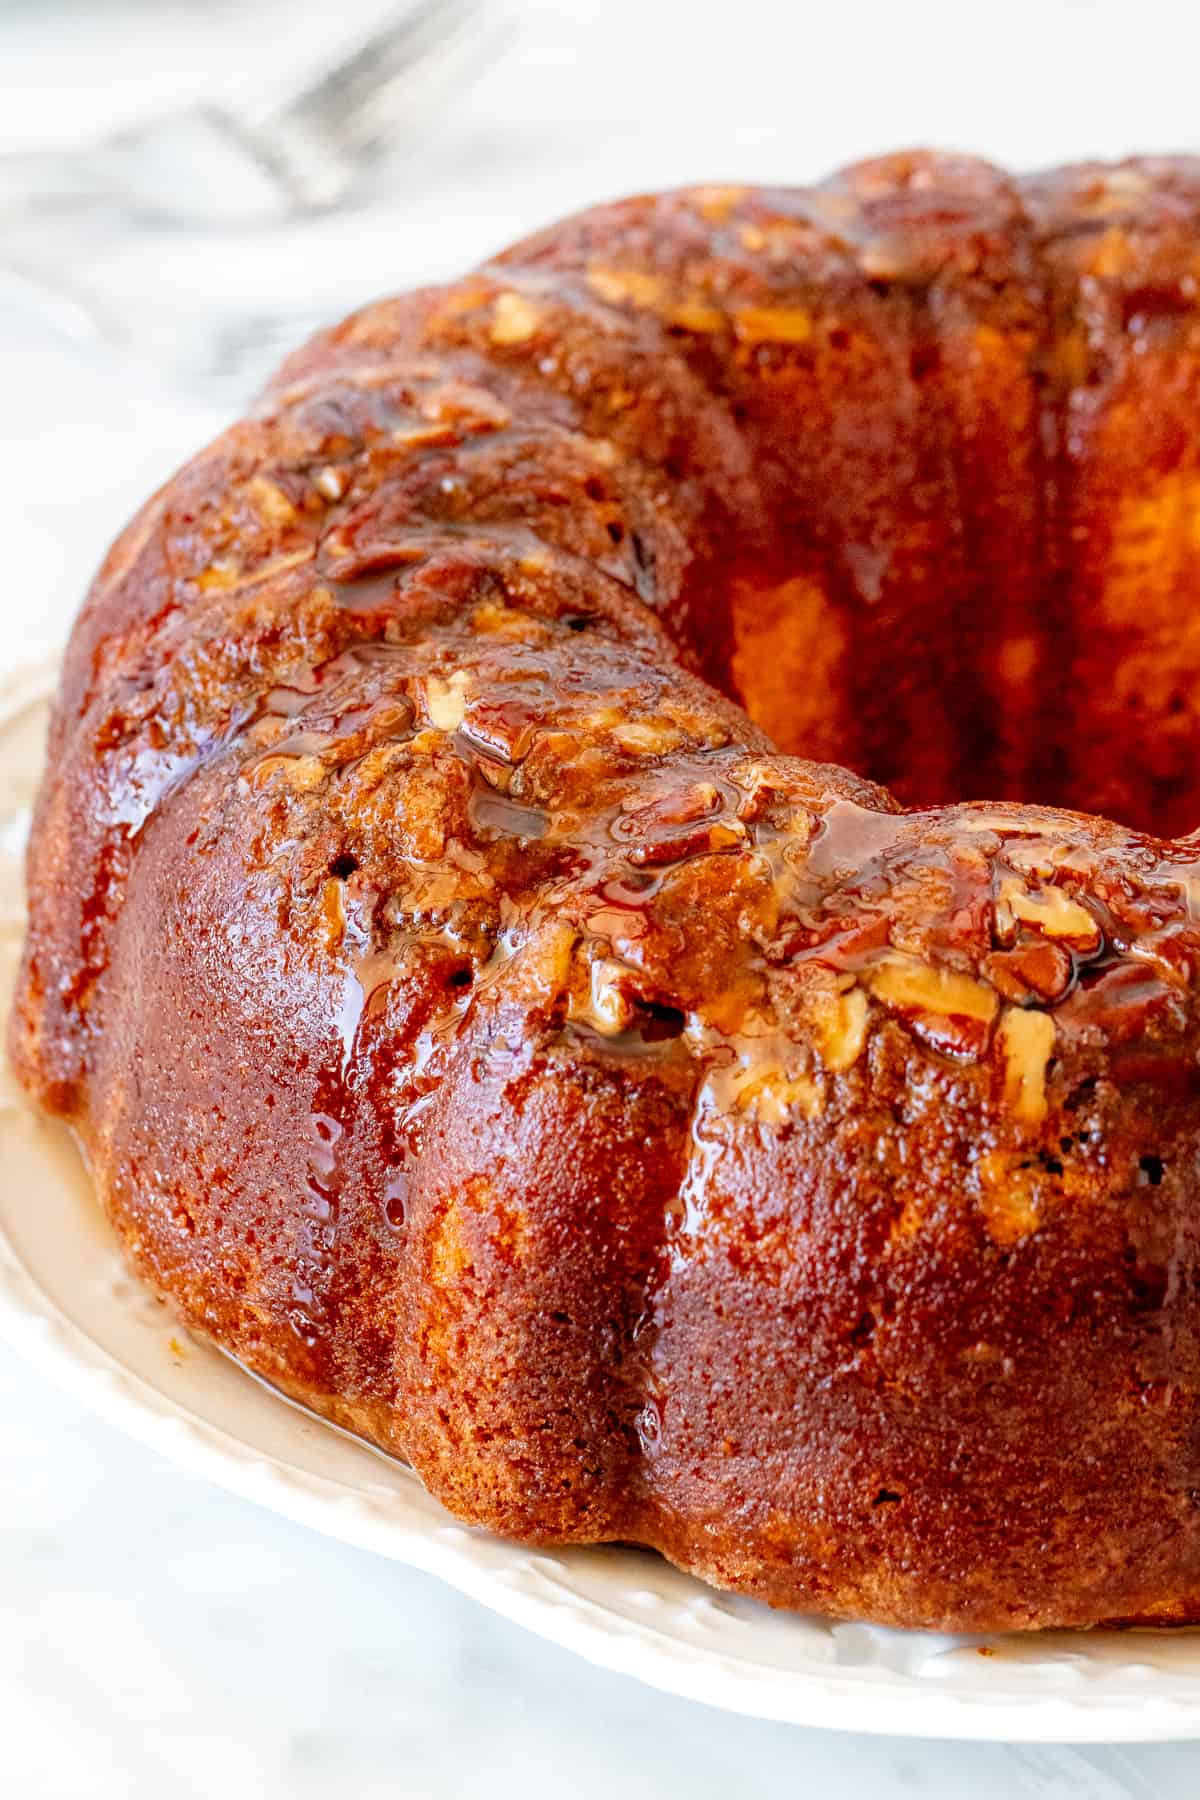 Rum-soaked cake made in a bundt pan with pecans.